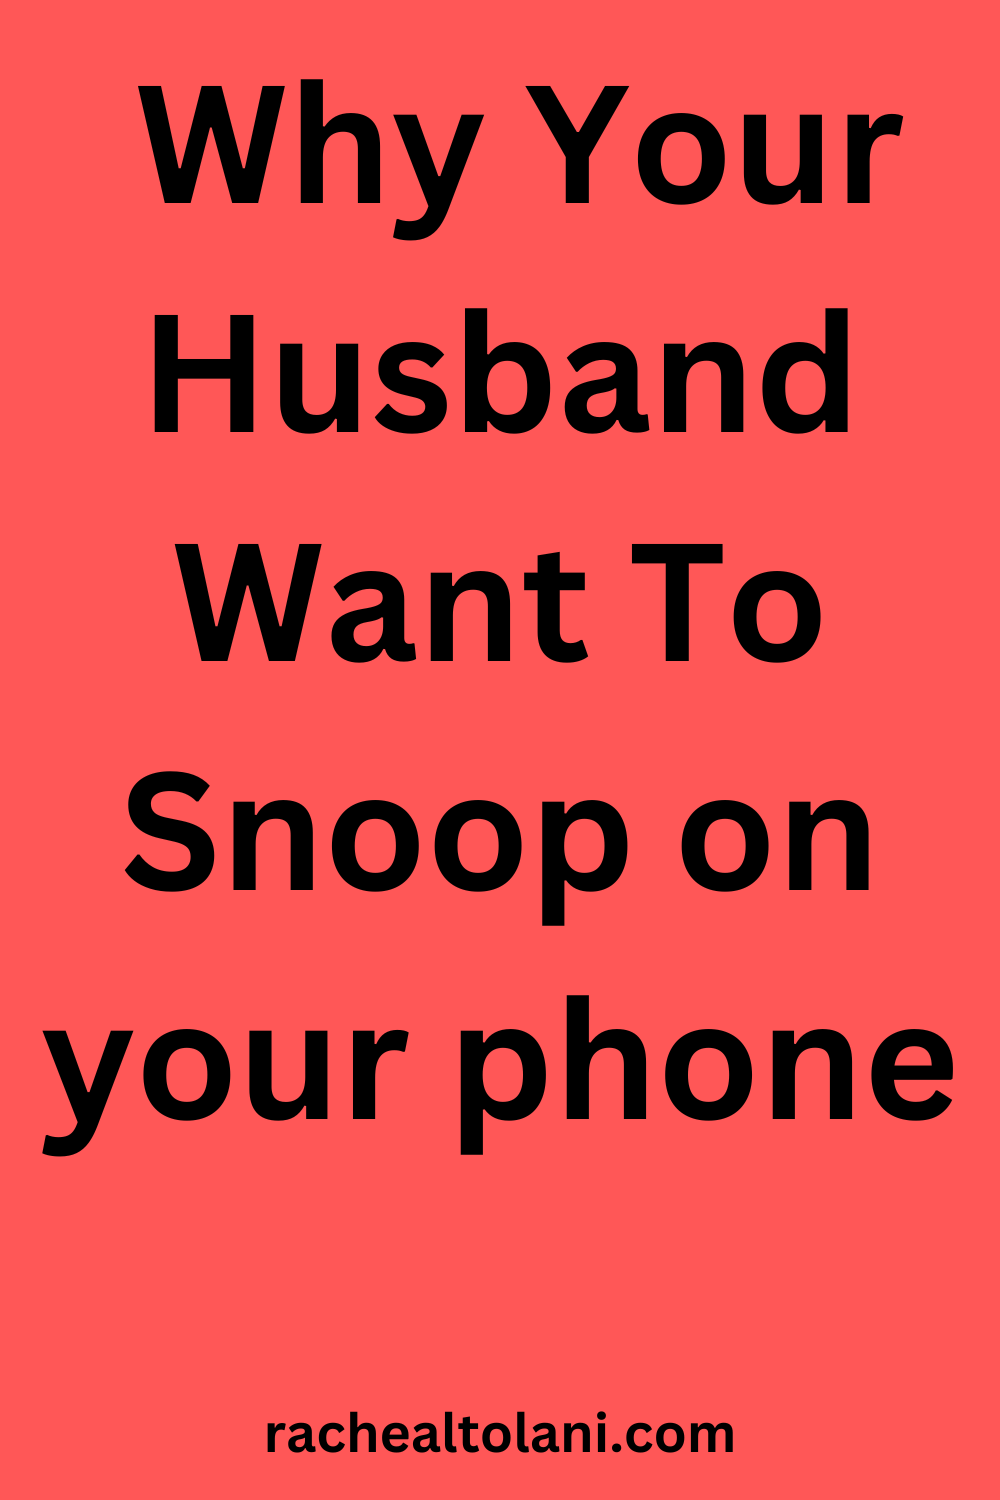 Why Your boyfriend is Snooping on your phone